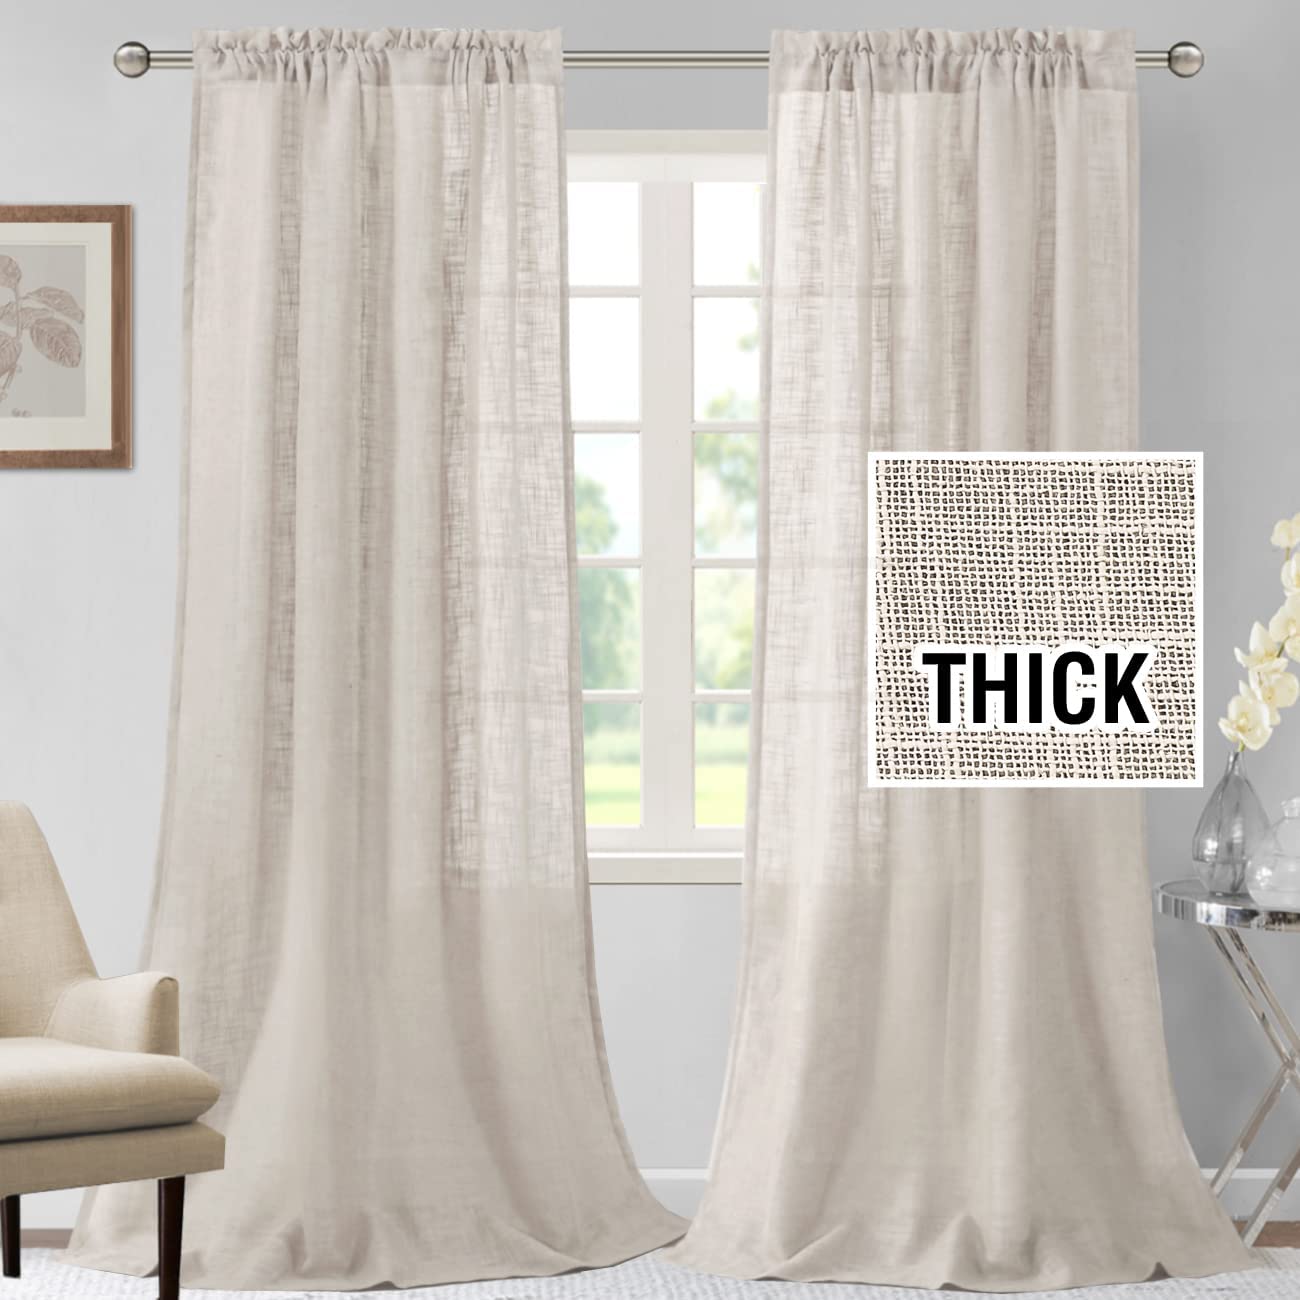 Linen sheer curtains soften the perfectly monochrome interiors of Taf and  Br…  Curtains living room modern, Linen curtains living room, Sheers  curtains living room